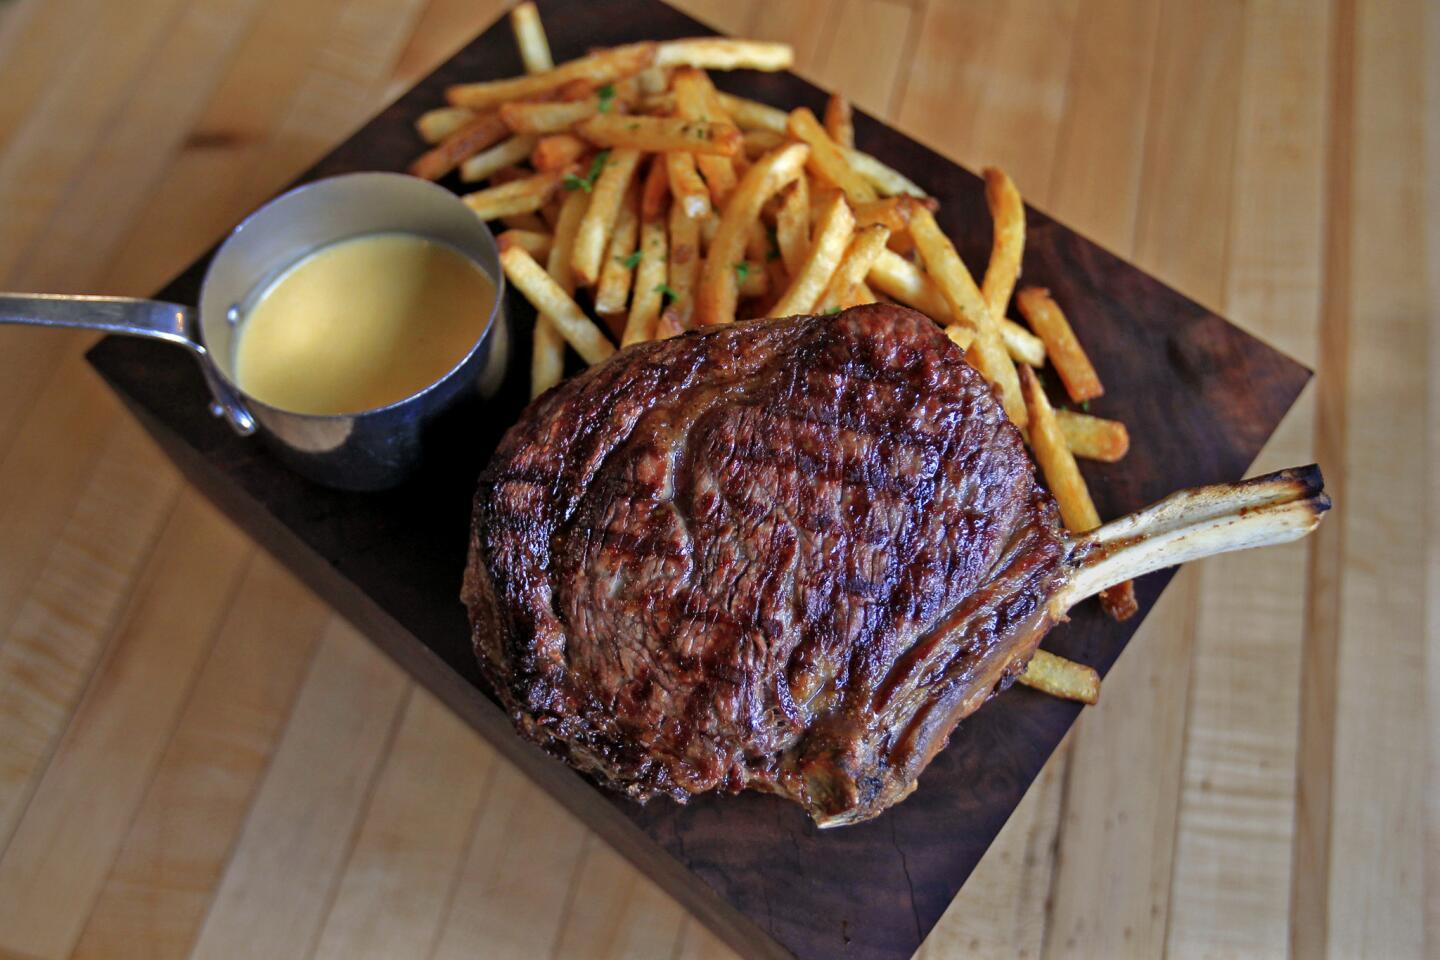 French fries and steak, at Republique